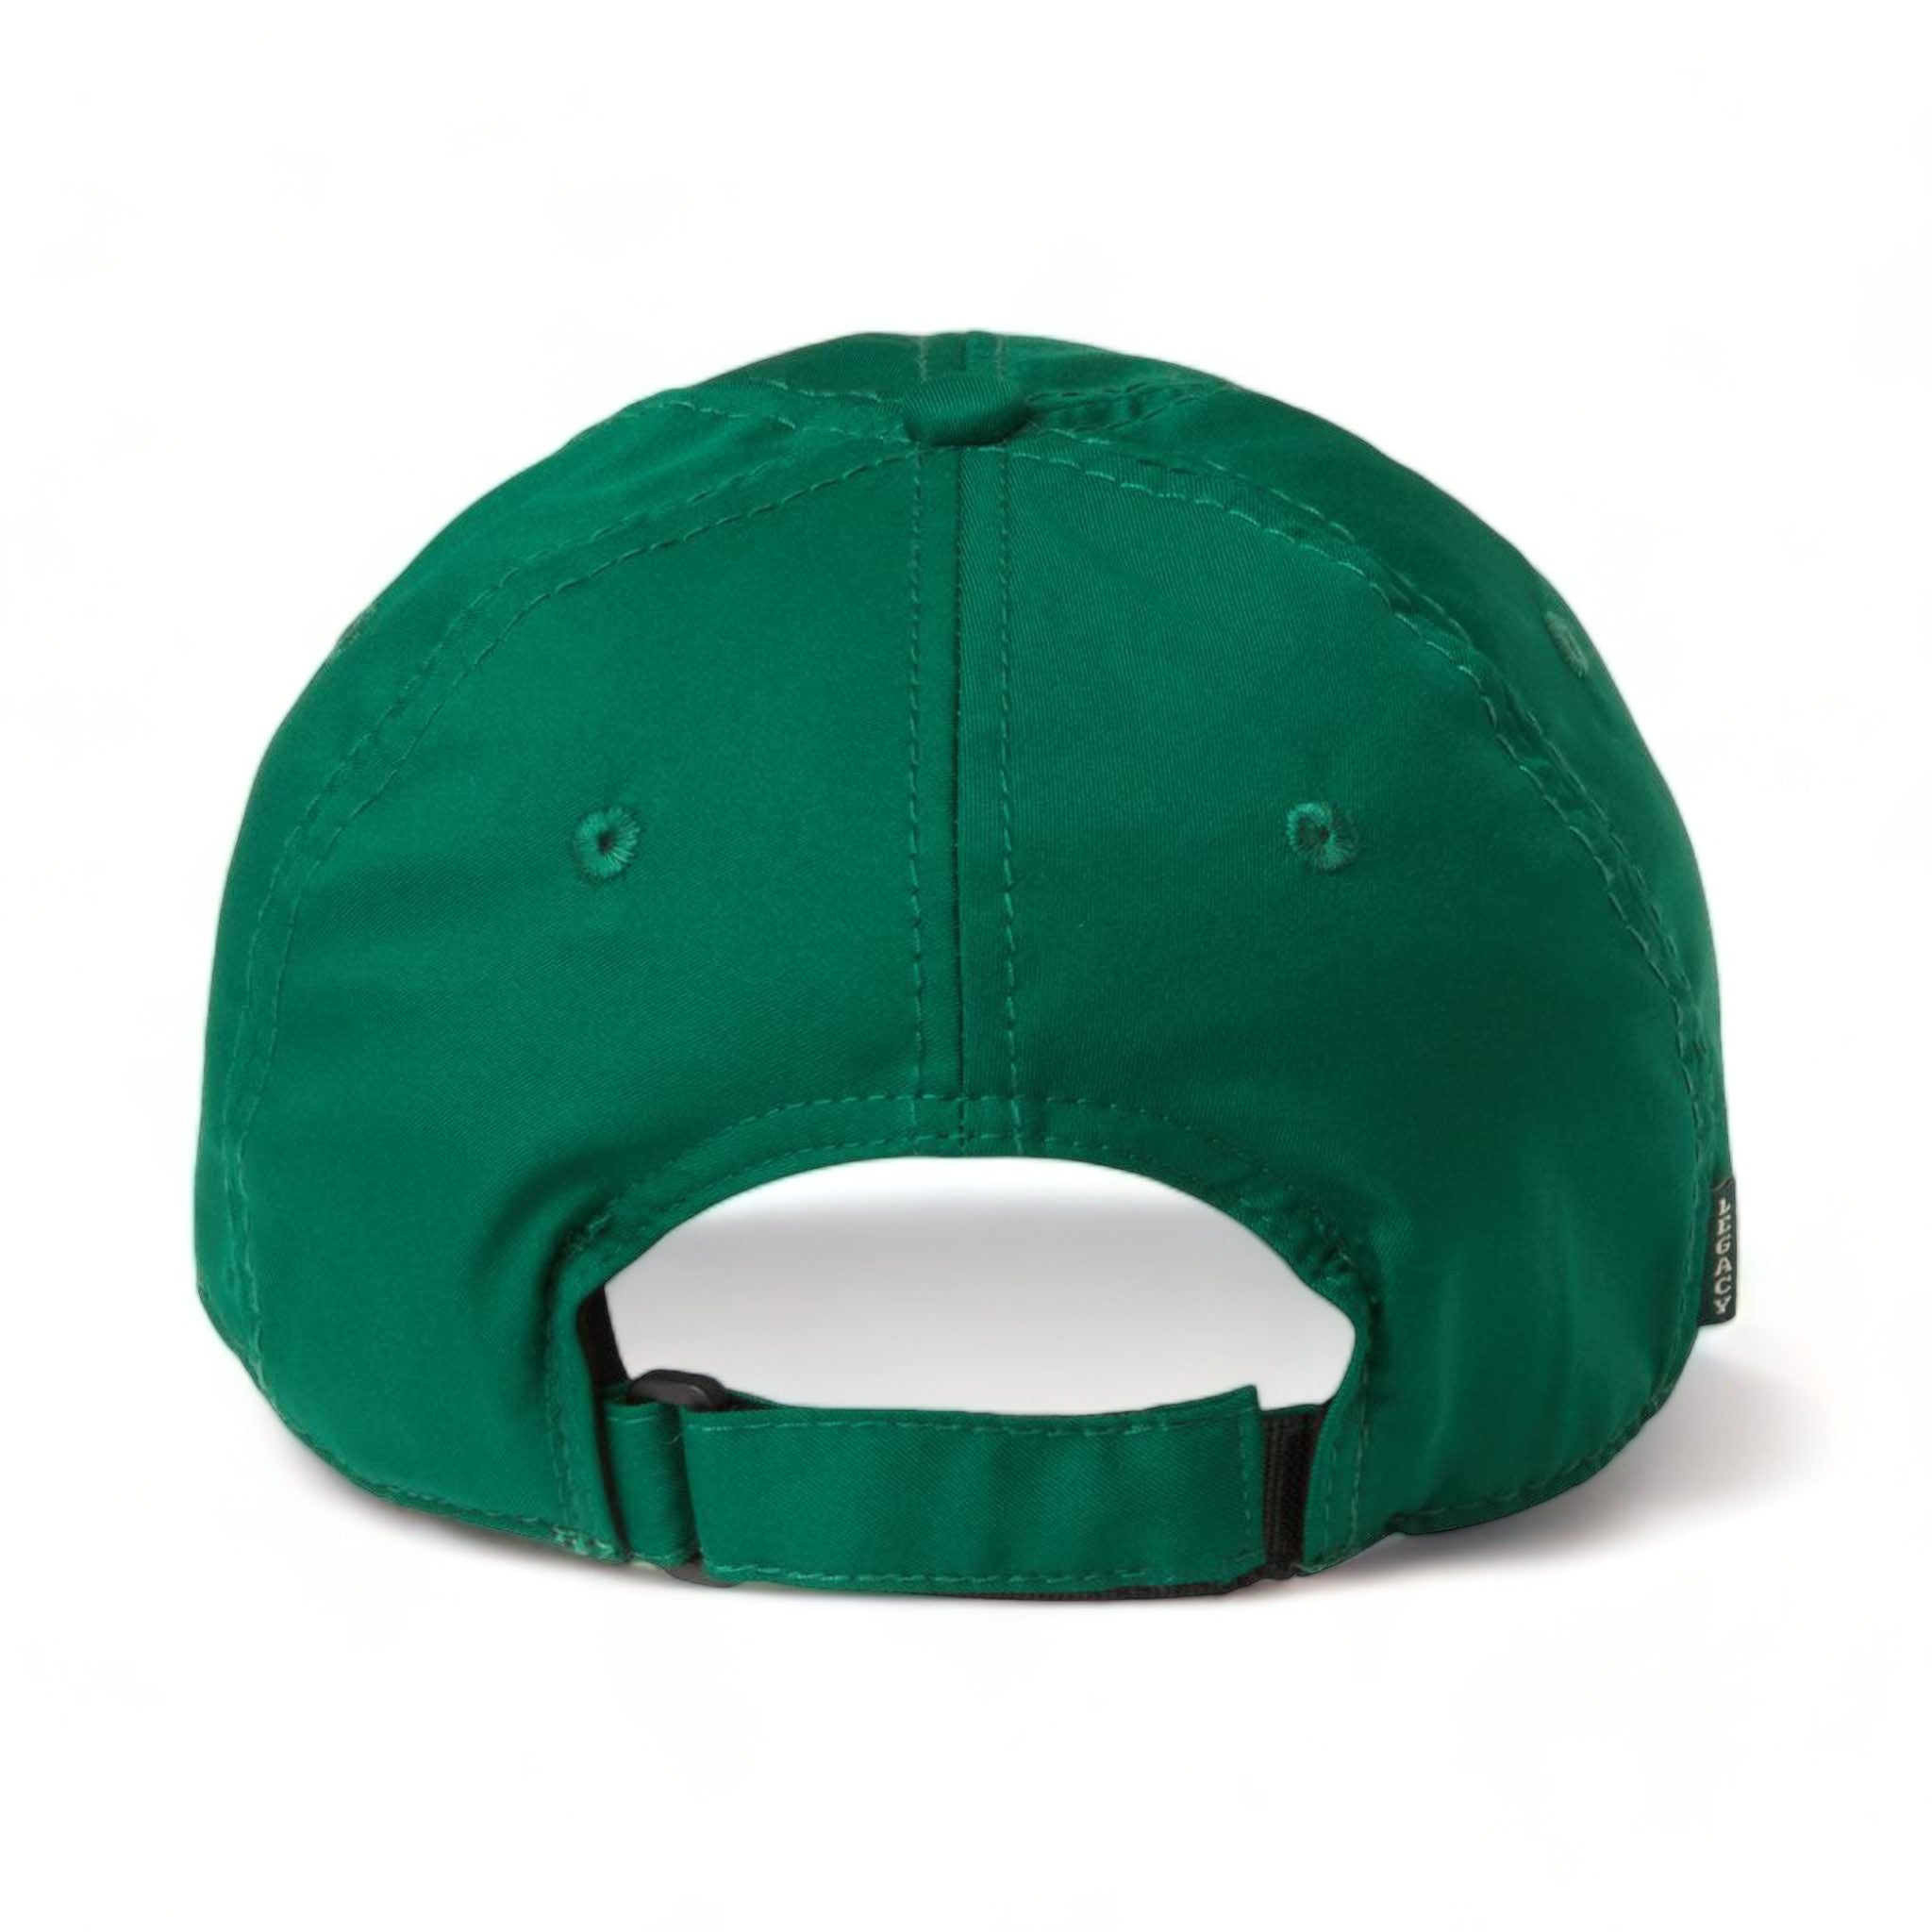 Back view of LEGACY CFA custom hat in forest